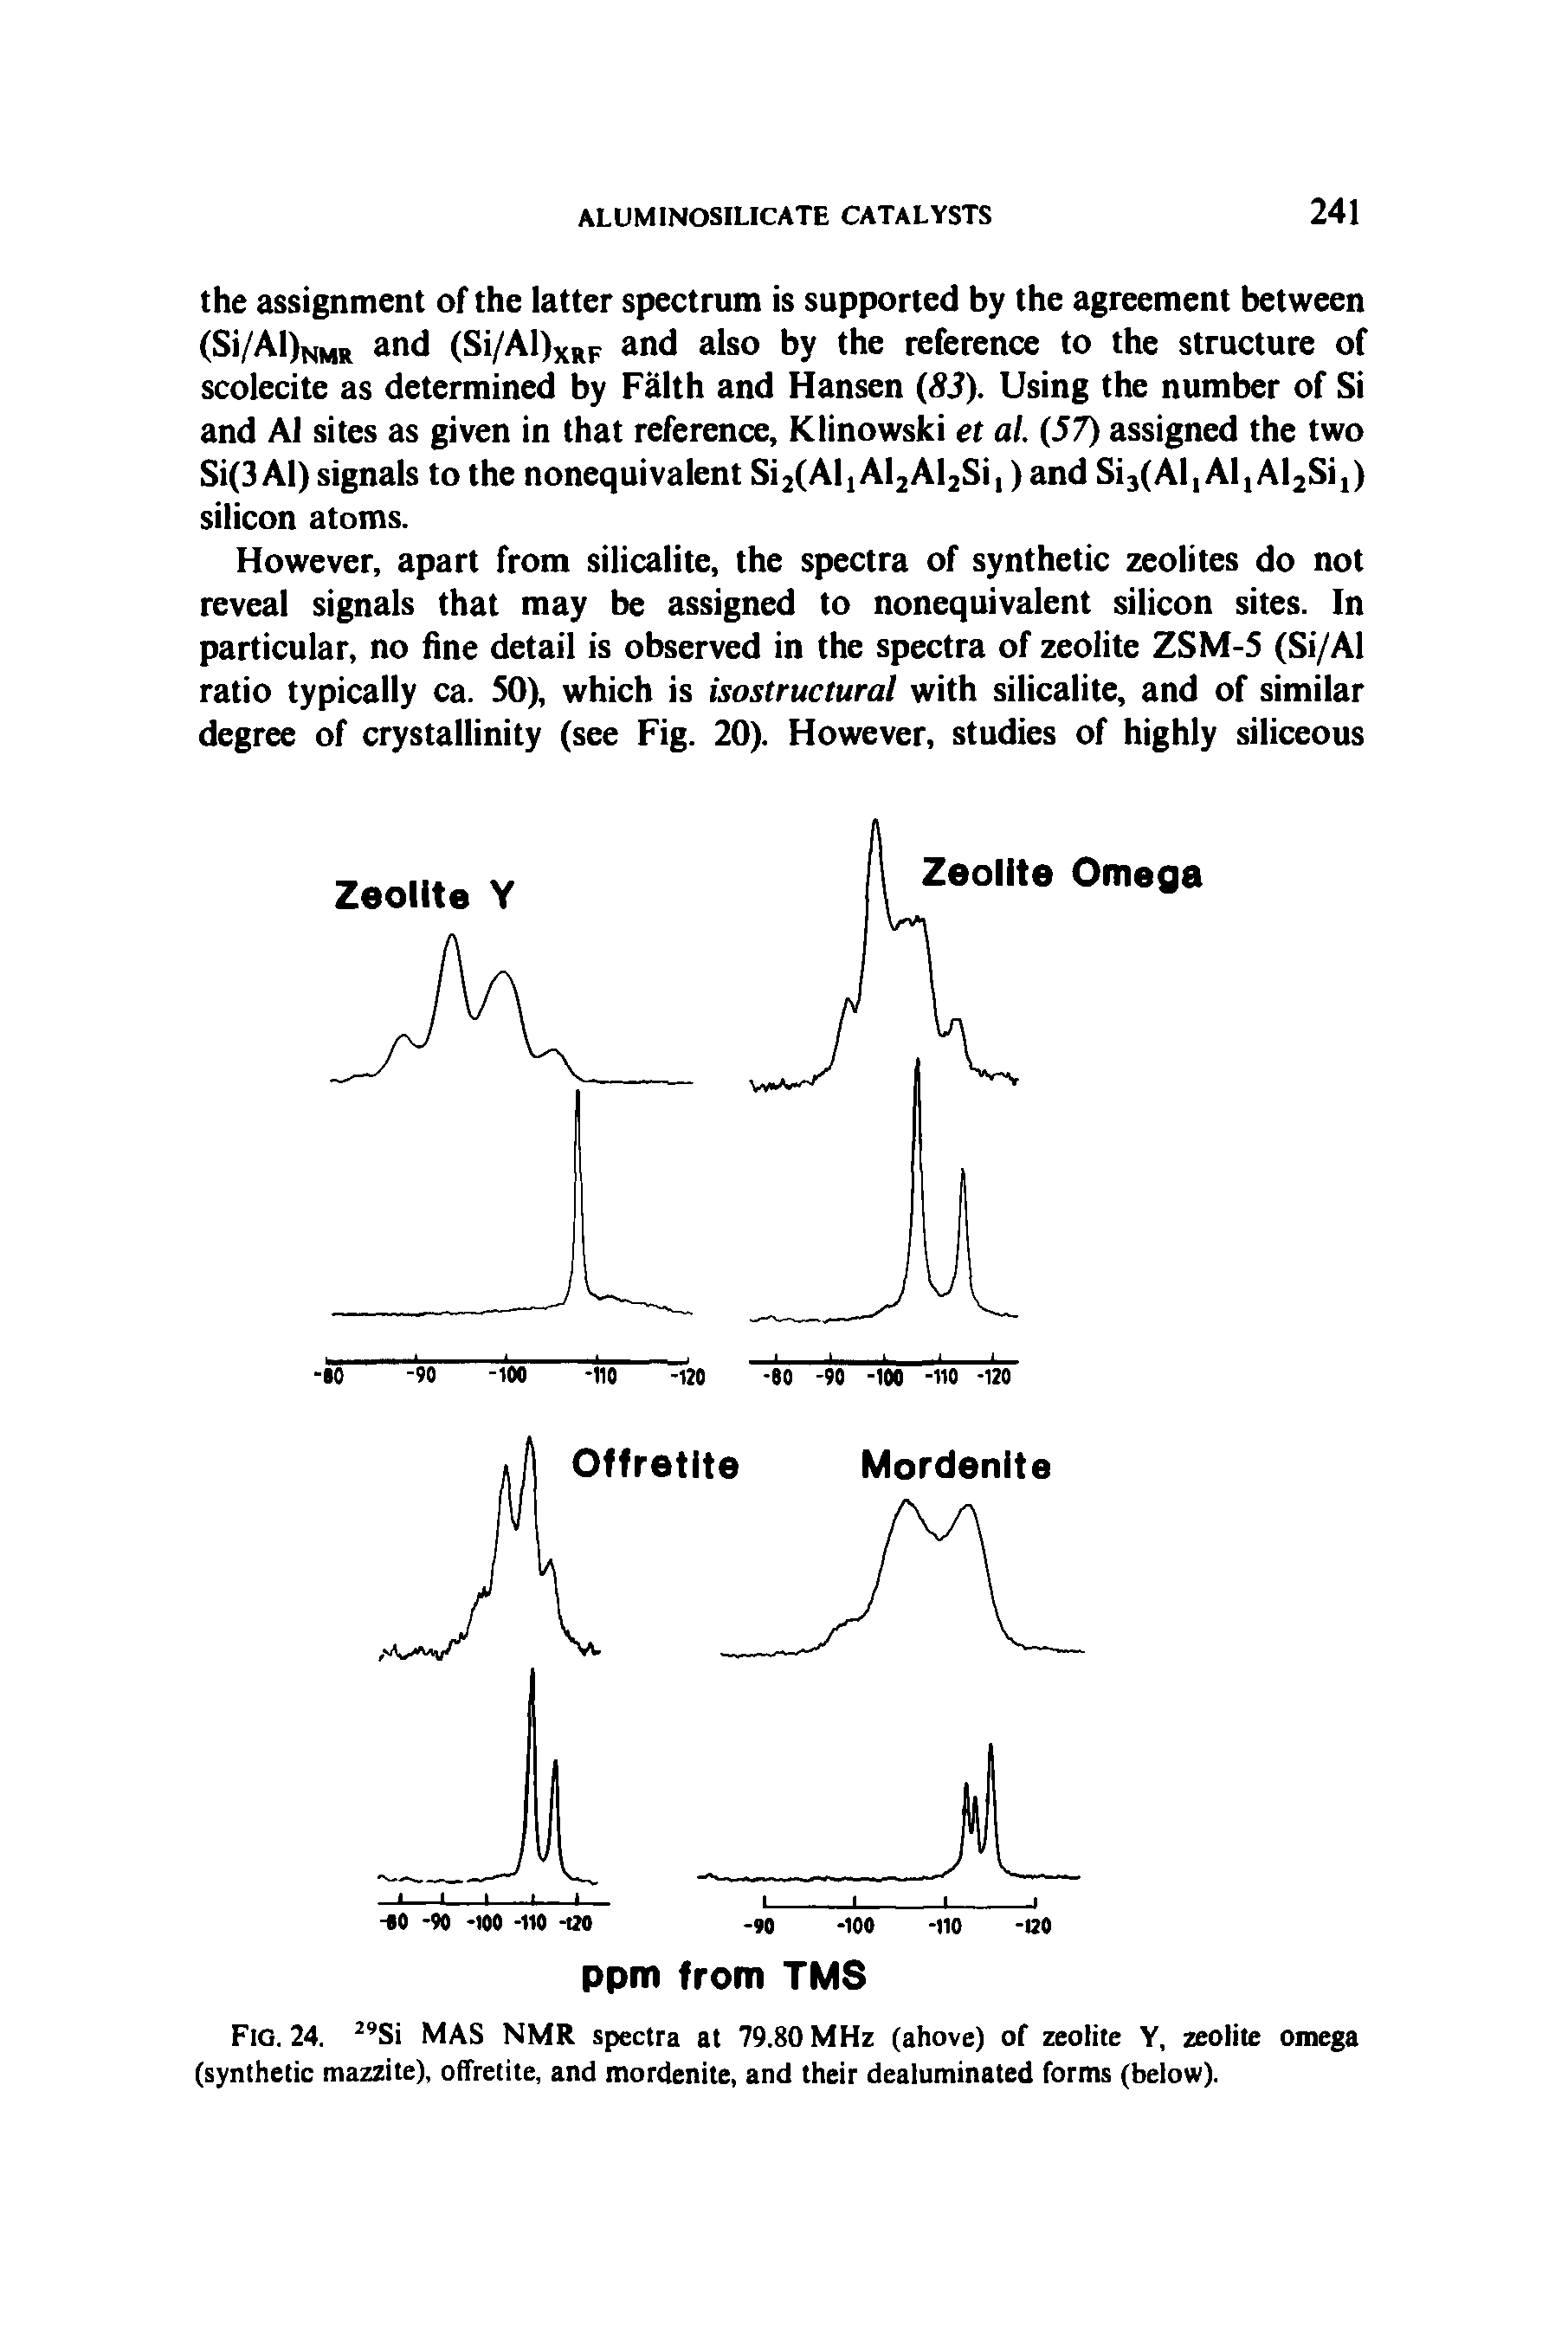 Fig. 24. 29Si MAS NMR spectra at 79.80 MHz (ahove) of zeolite Y, zeolite omega (synthetic mazzite), offretite, and mordenite, and their dealuminated forms (below).